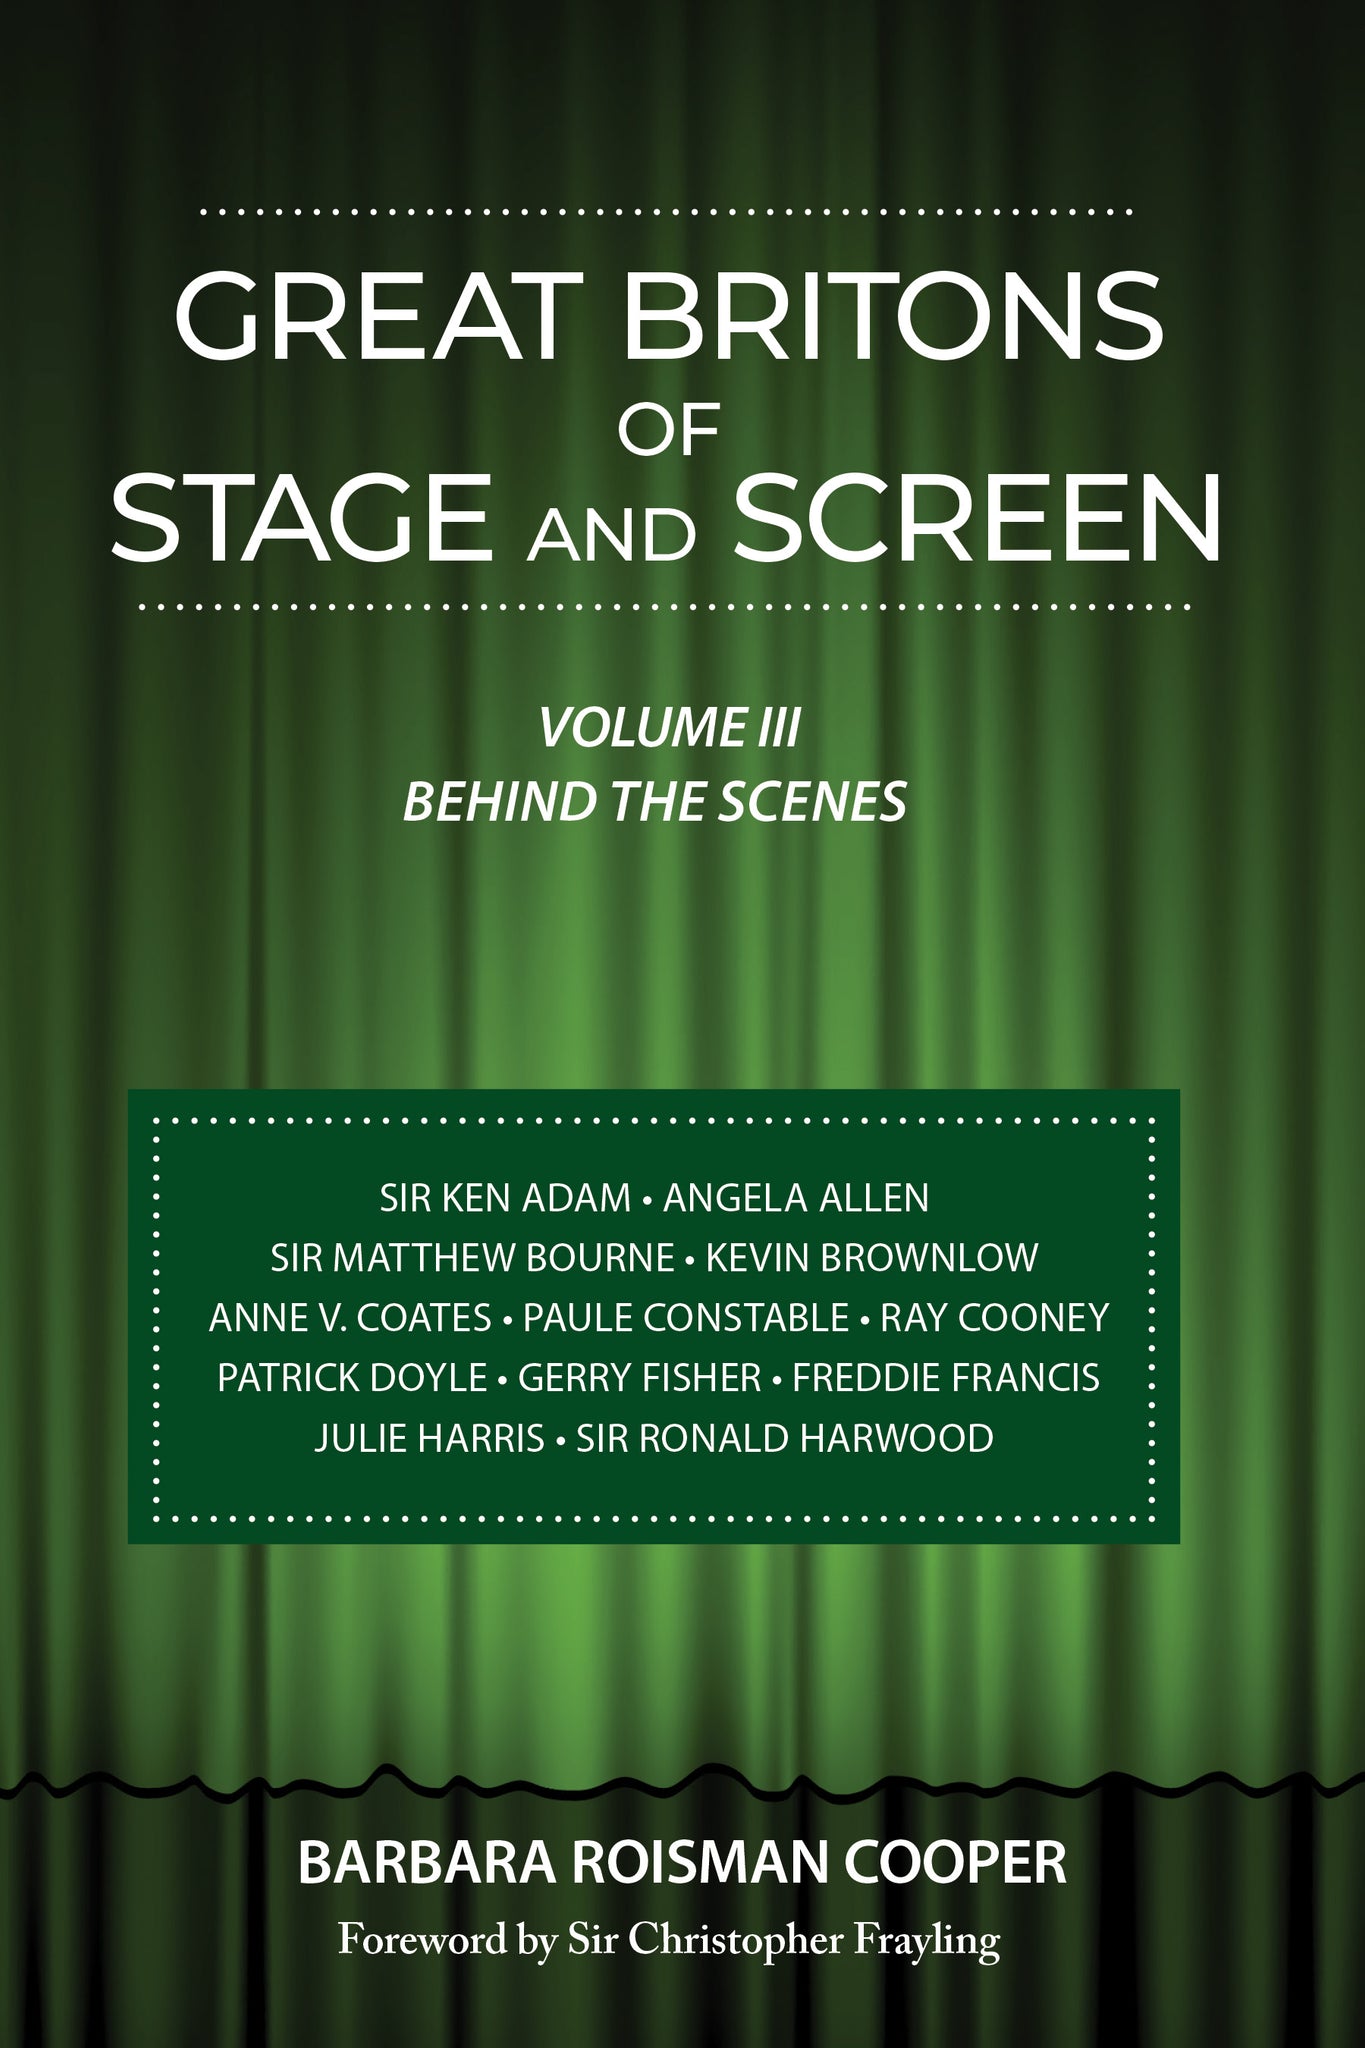 Great Britons of Stage and Screen: Volume III: Behind the Scenes (paperback)